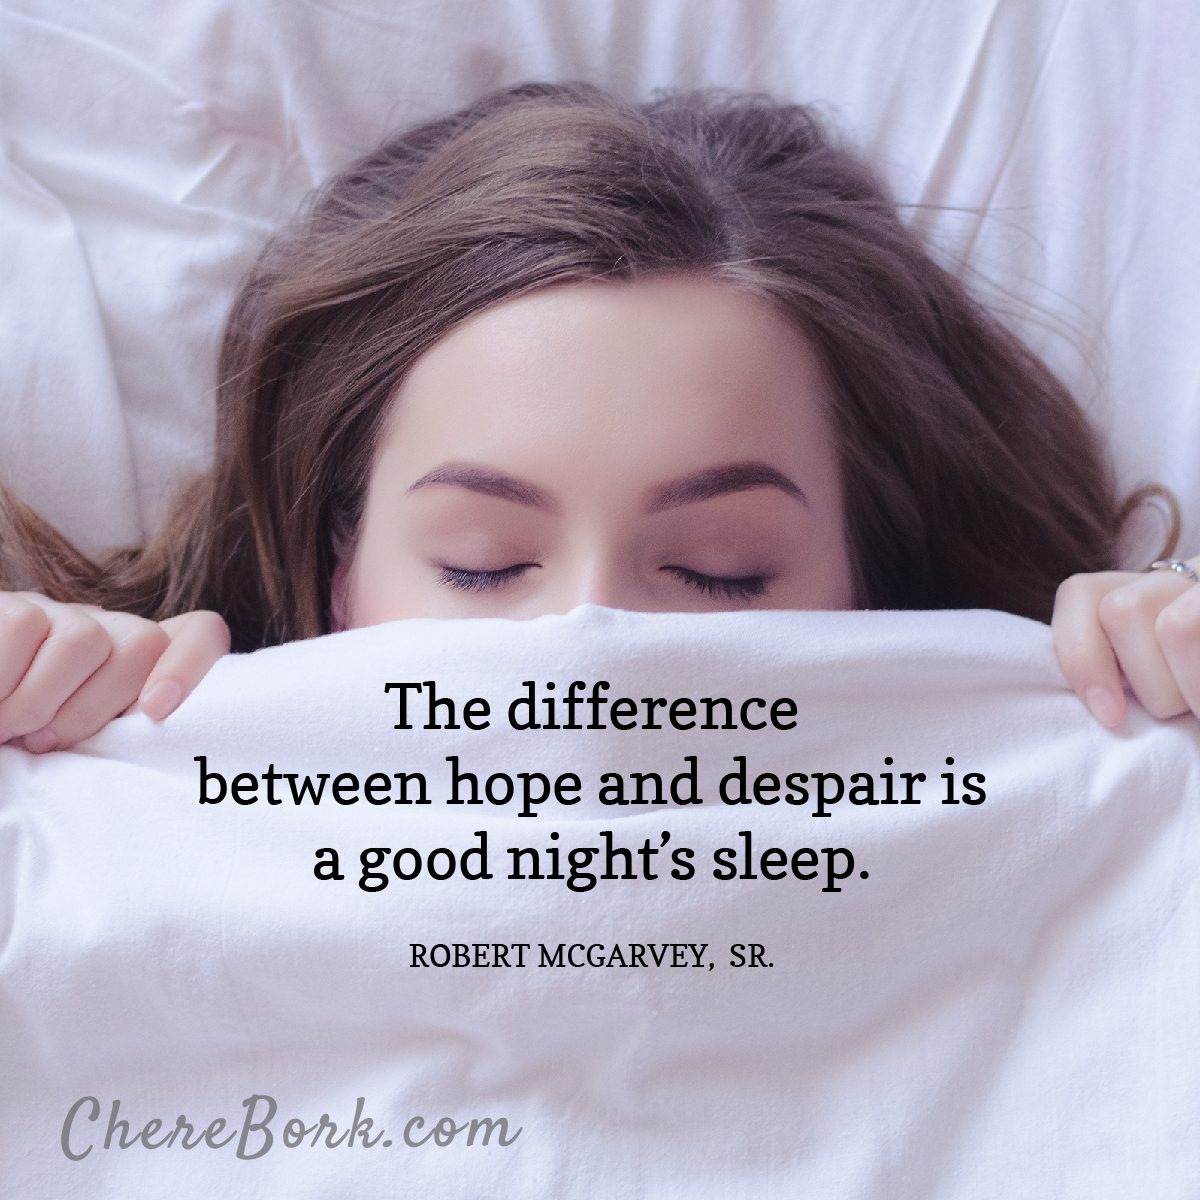 The difference between hope and despair is a god night's sleep. Robert McGarvey, Sr.